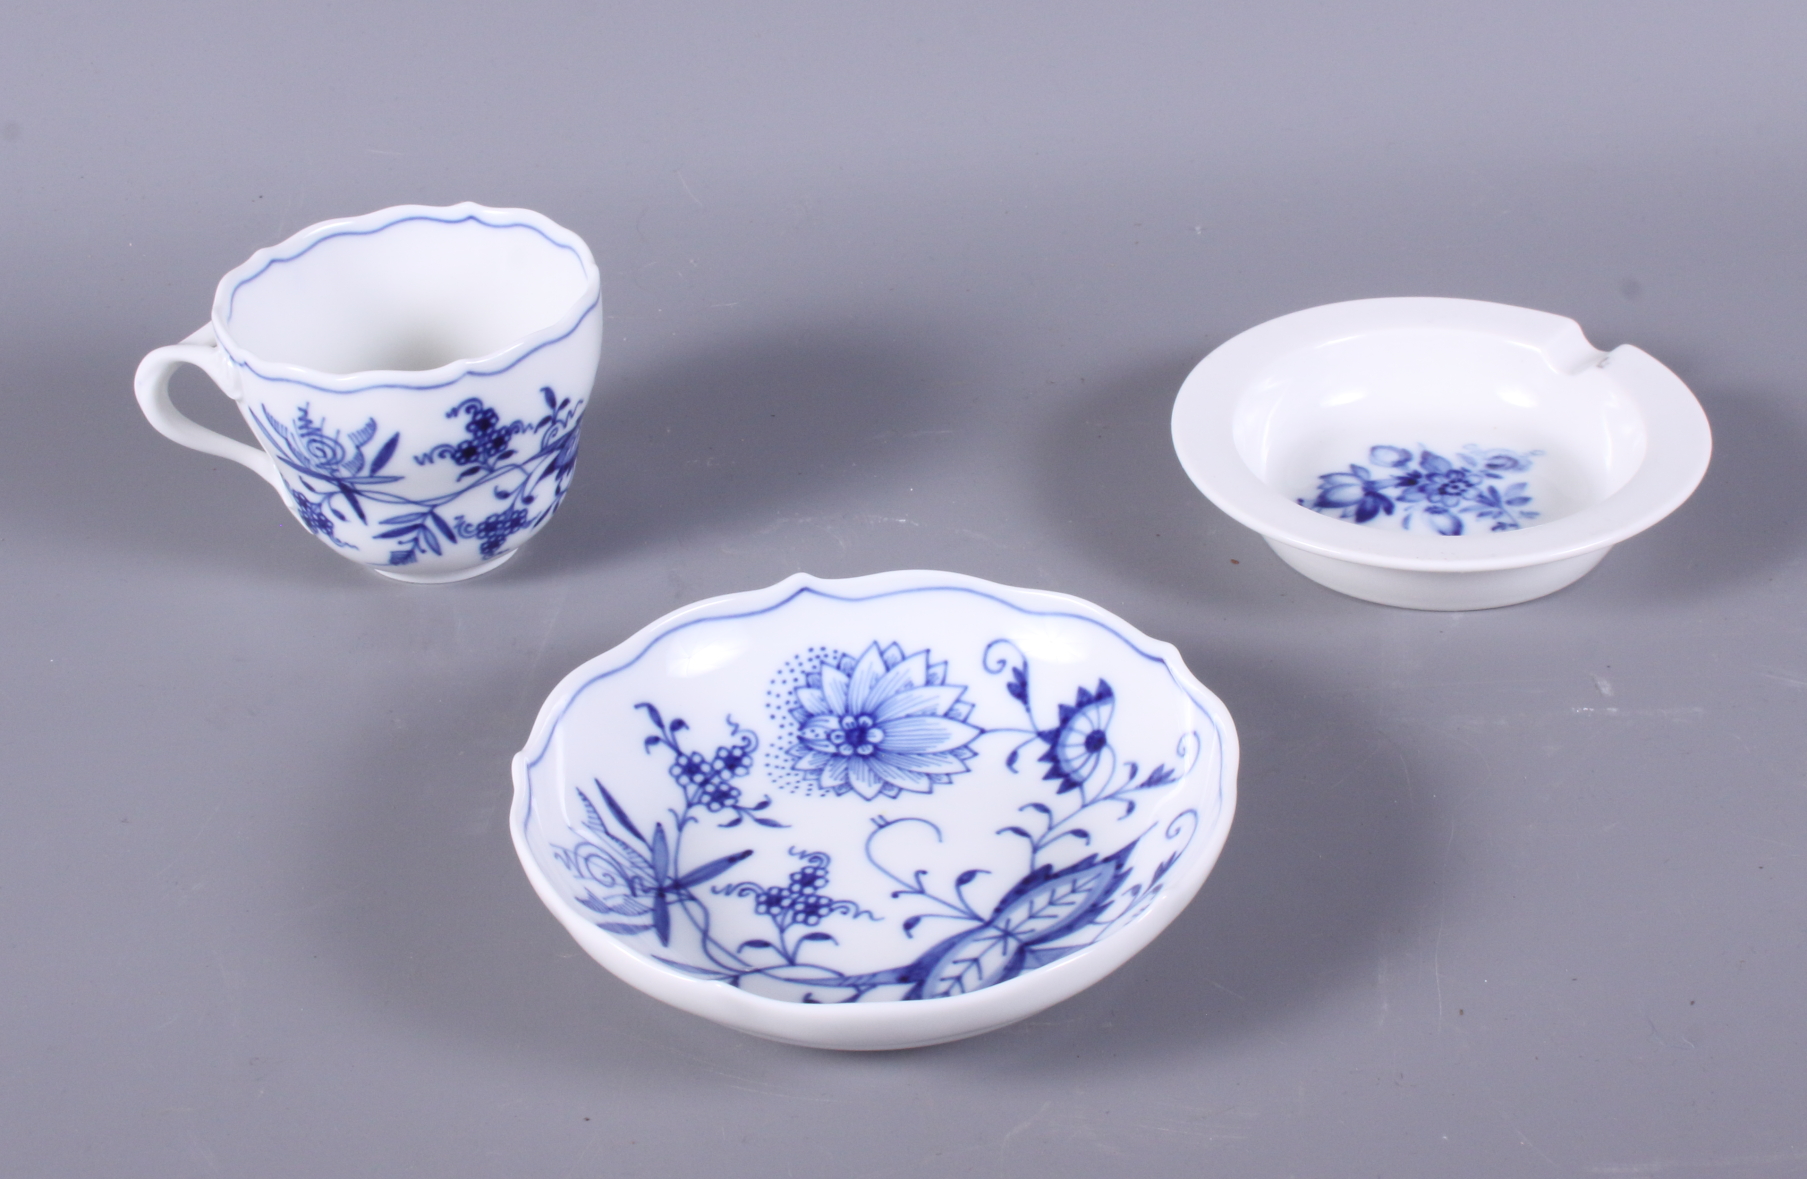 A Meissen blue and white decorated coffee cup, a similar saucer and ashtray